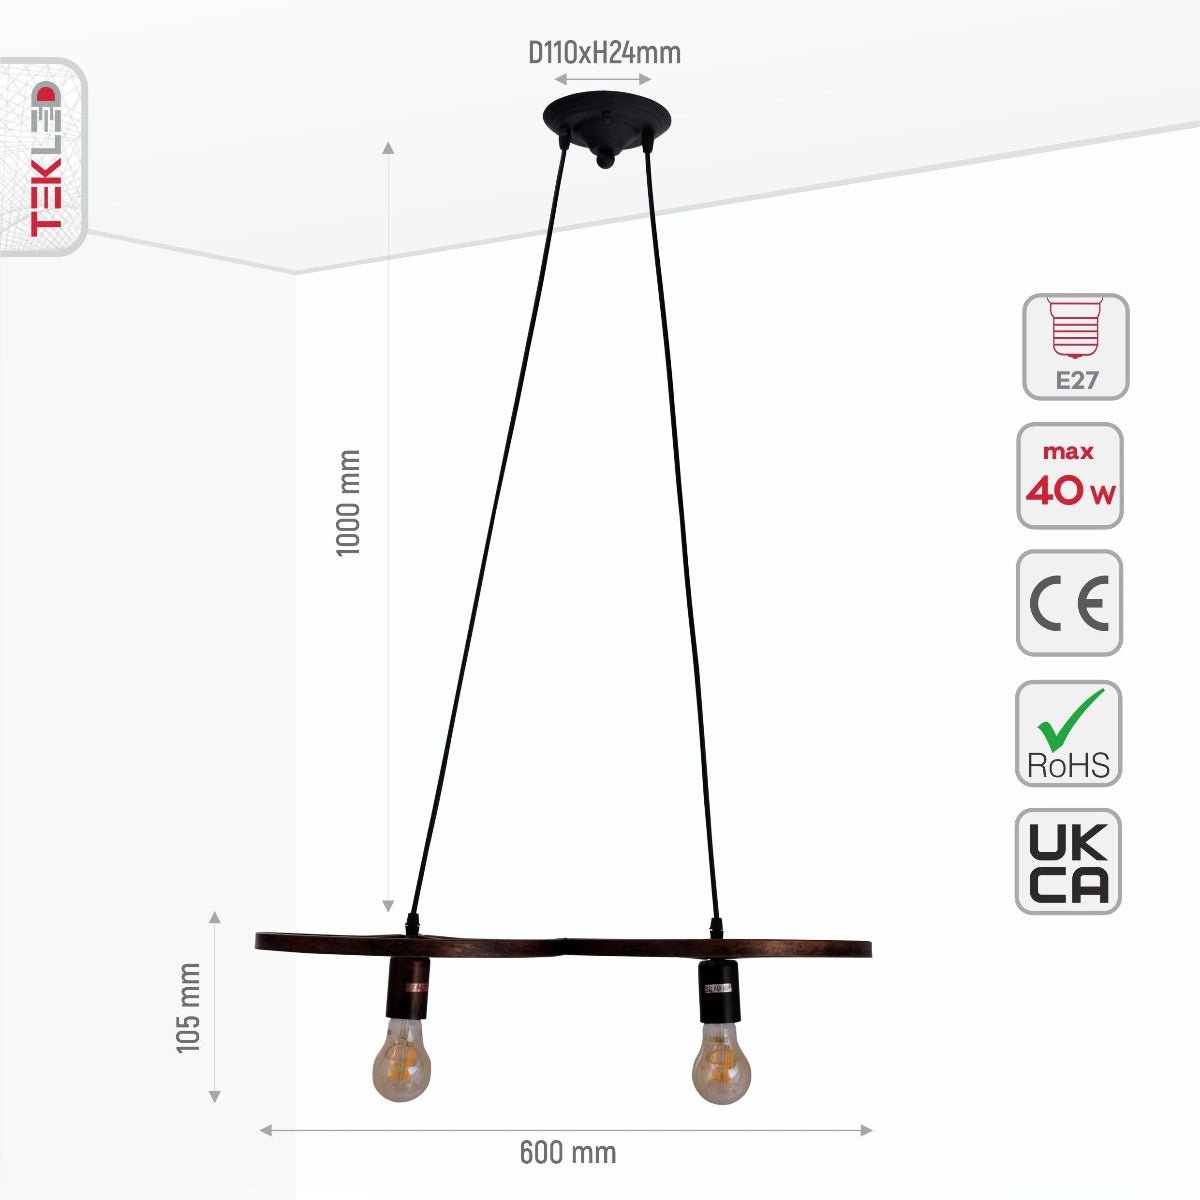 Size and specs of Vintage Industrial Wagon Wheel Pendant Light with 2xE27 Fitting | TEKLED 158-17890